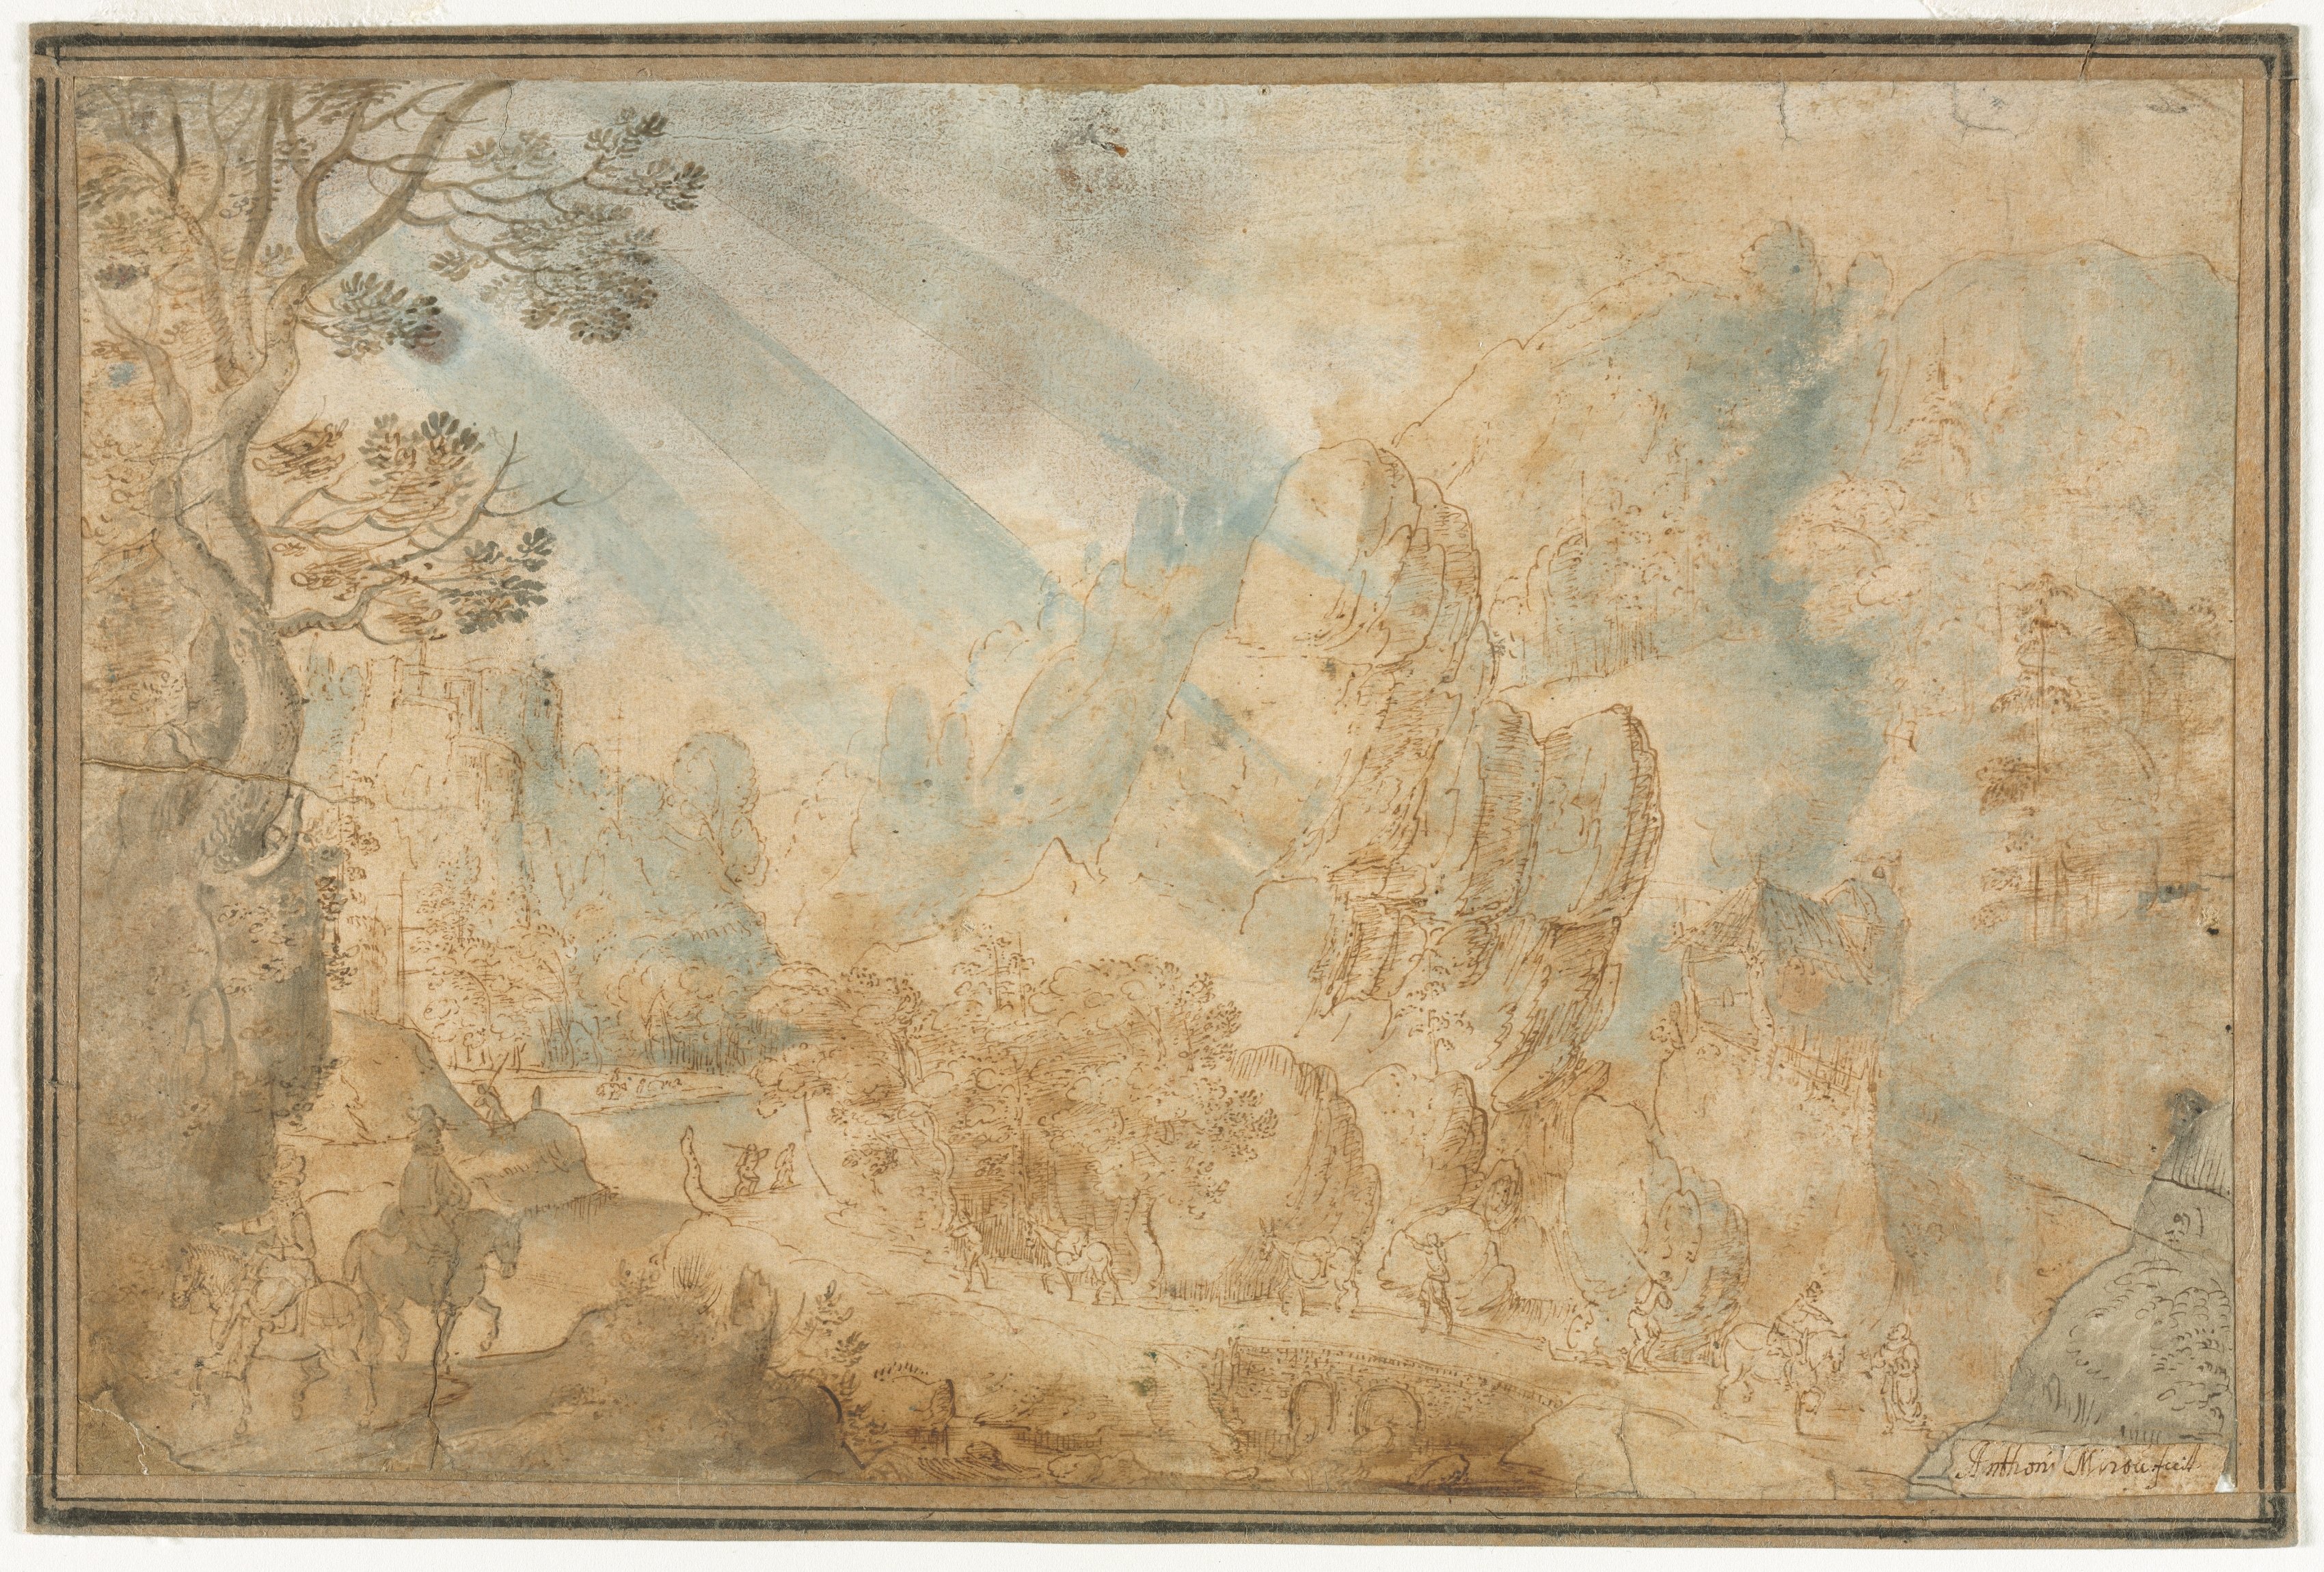 Mountain Landscape with Figures